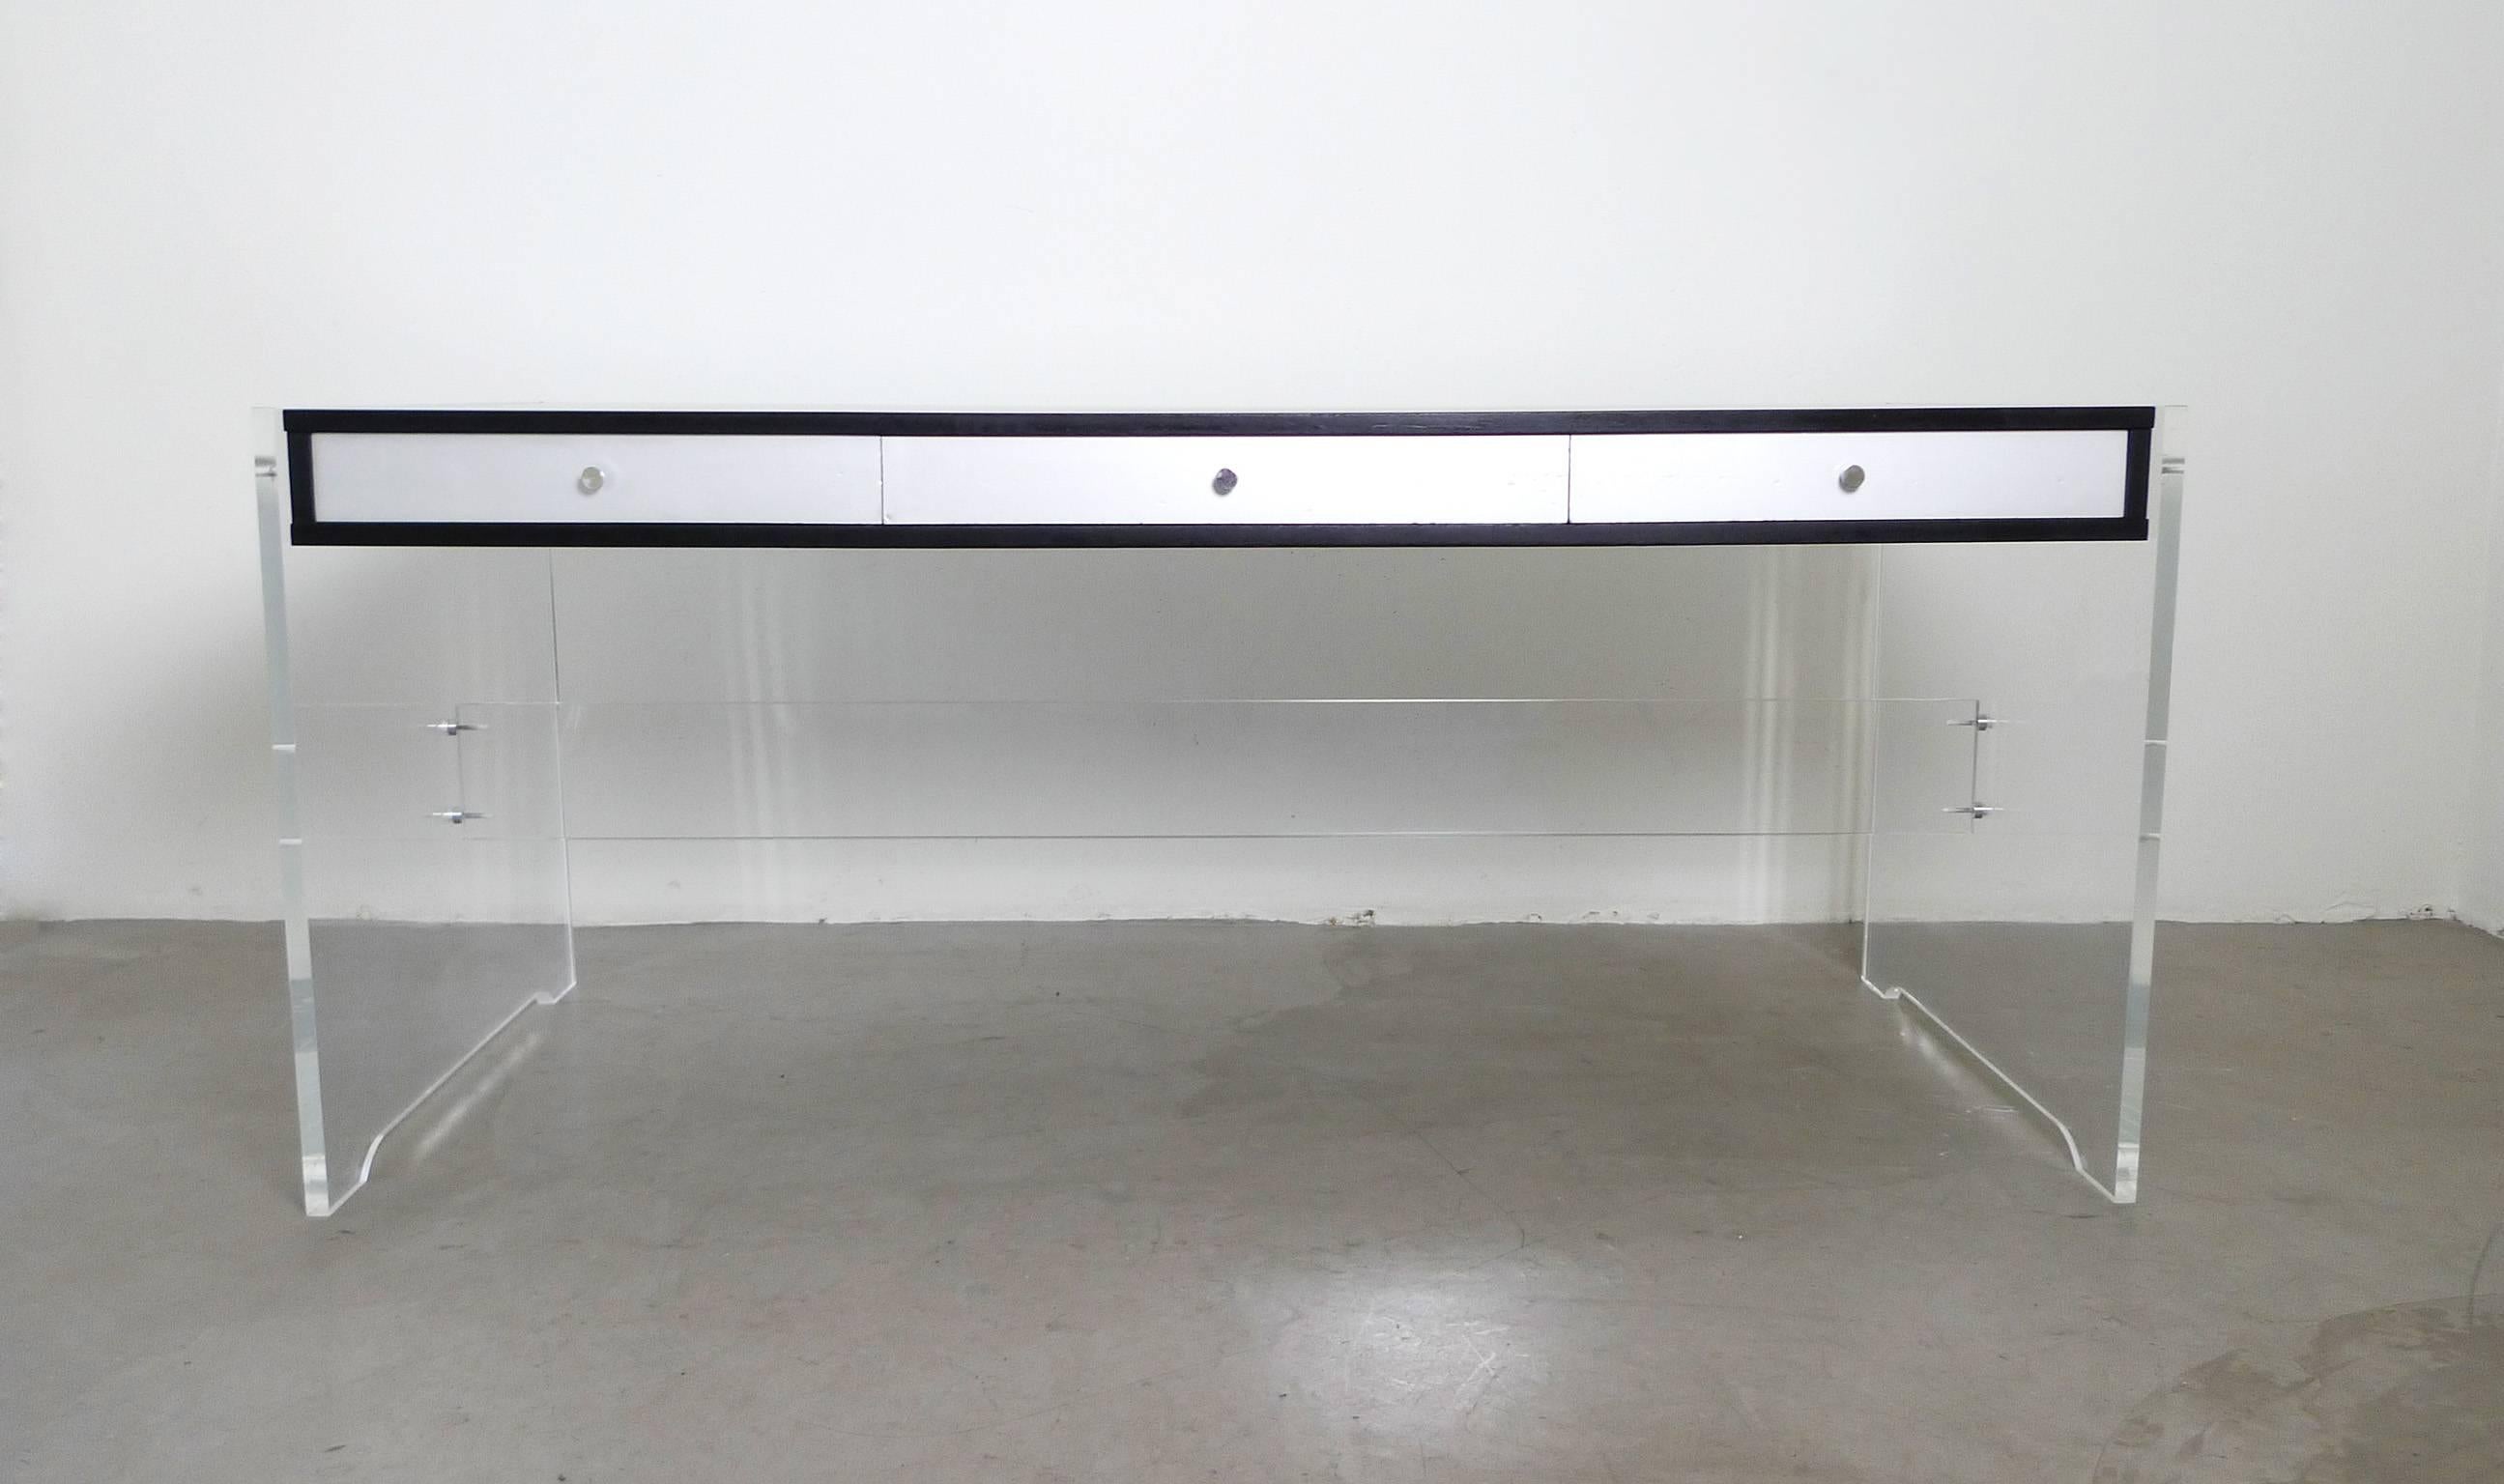 Free standing desk with black lacquered box and three drawers on a plexiglass stand. Each drawer has an aluminium front, a steel handle and is subdivided inside.
The "GP 160" model was designed by Poul Nörreklit in 1970 for Georg